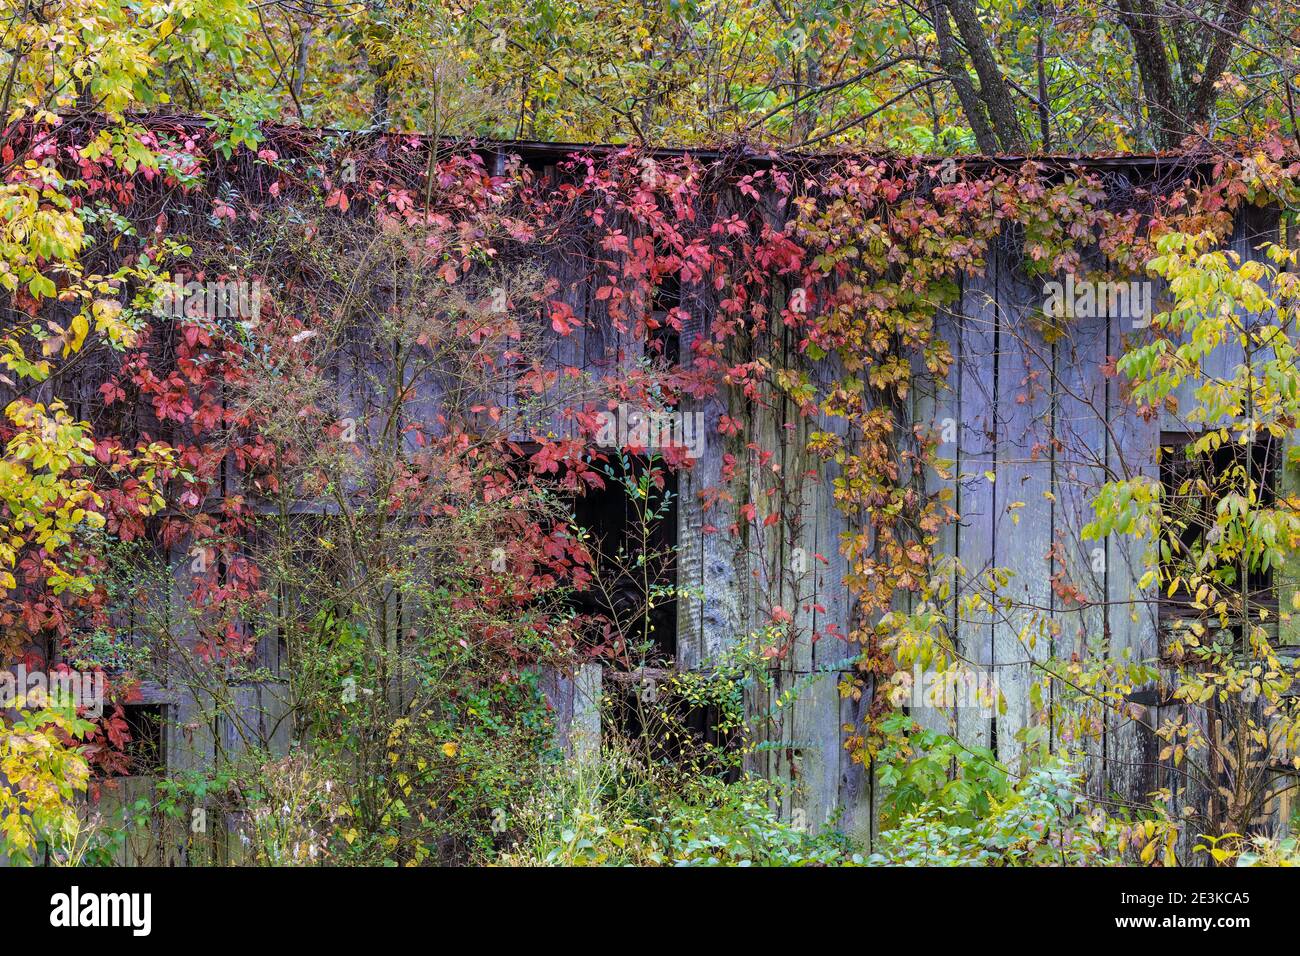 Vines grow on old abandonded building their autumn colors brighten up the decaying structures. Stock Photo